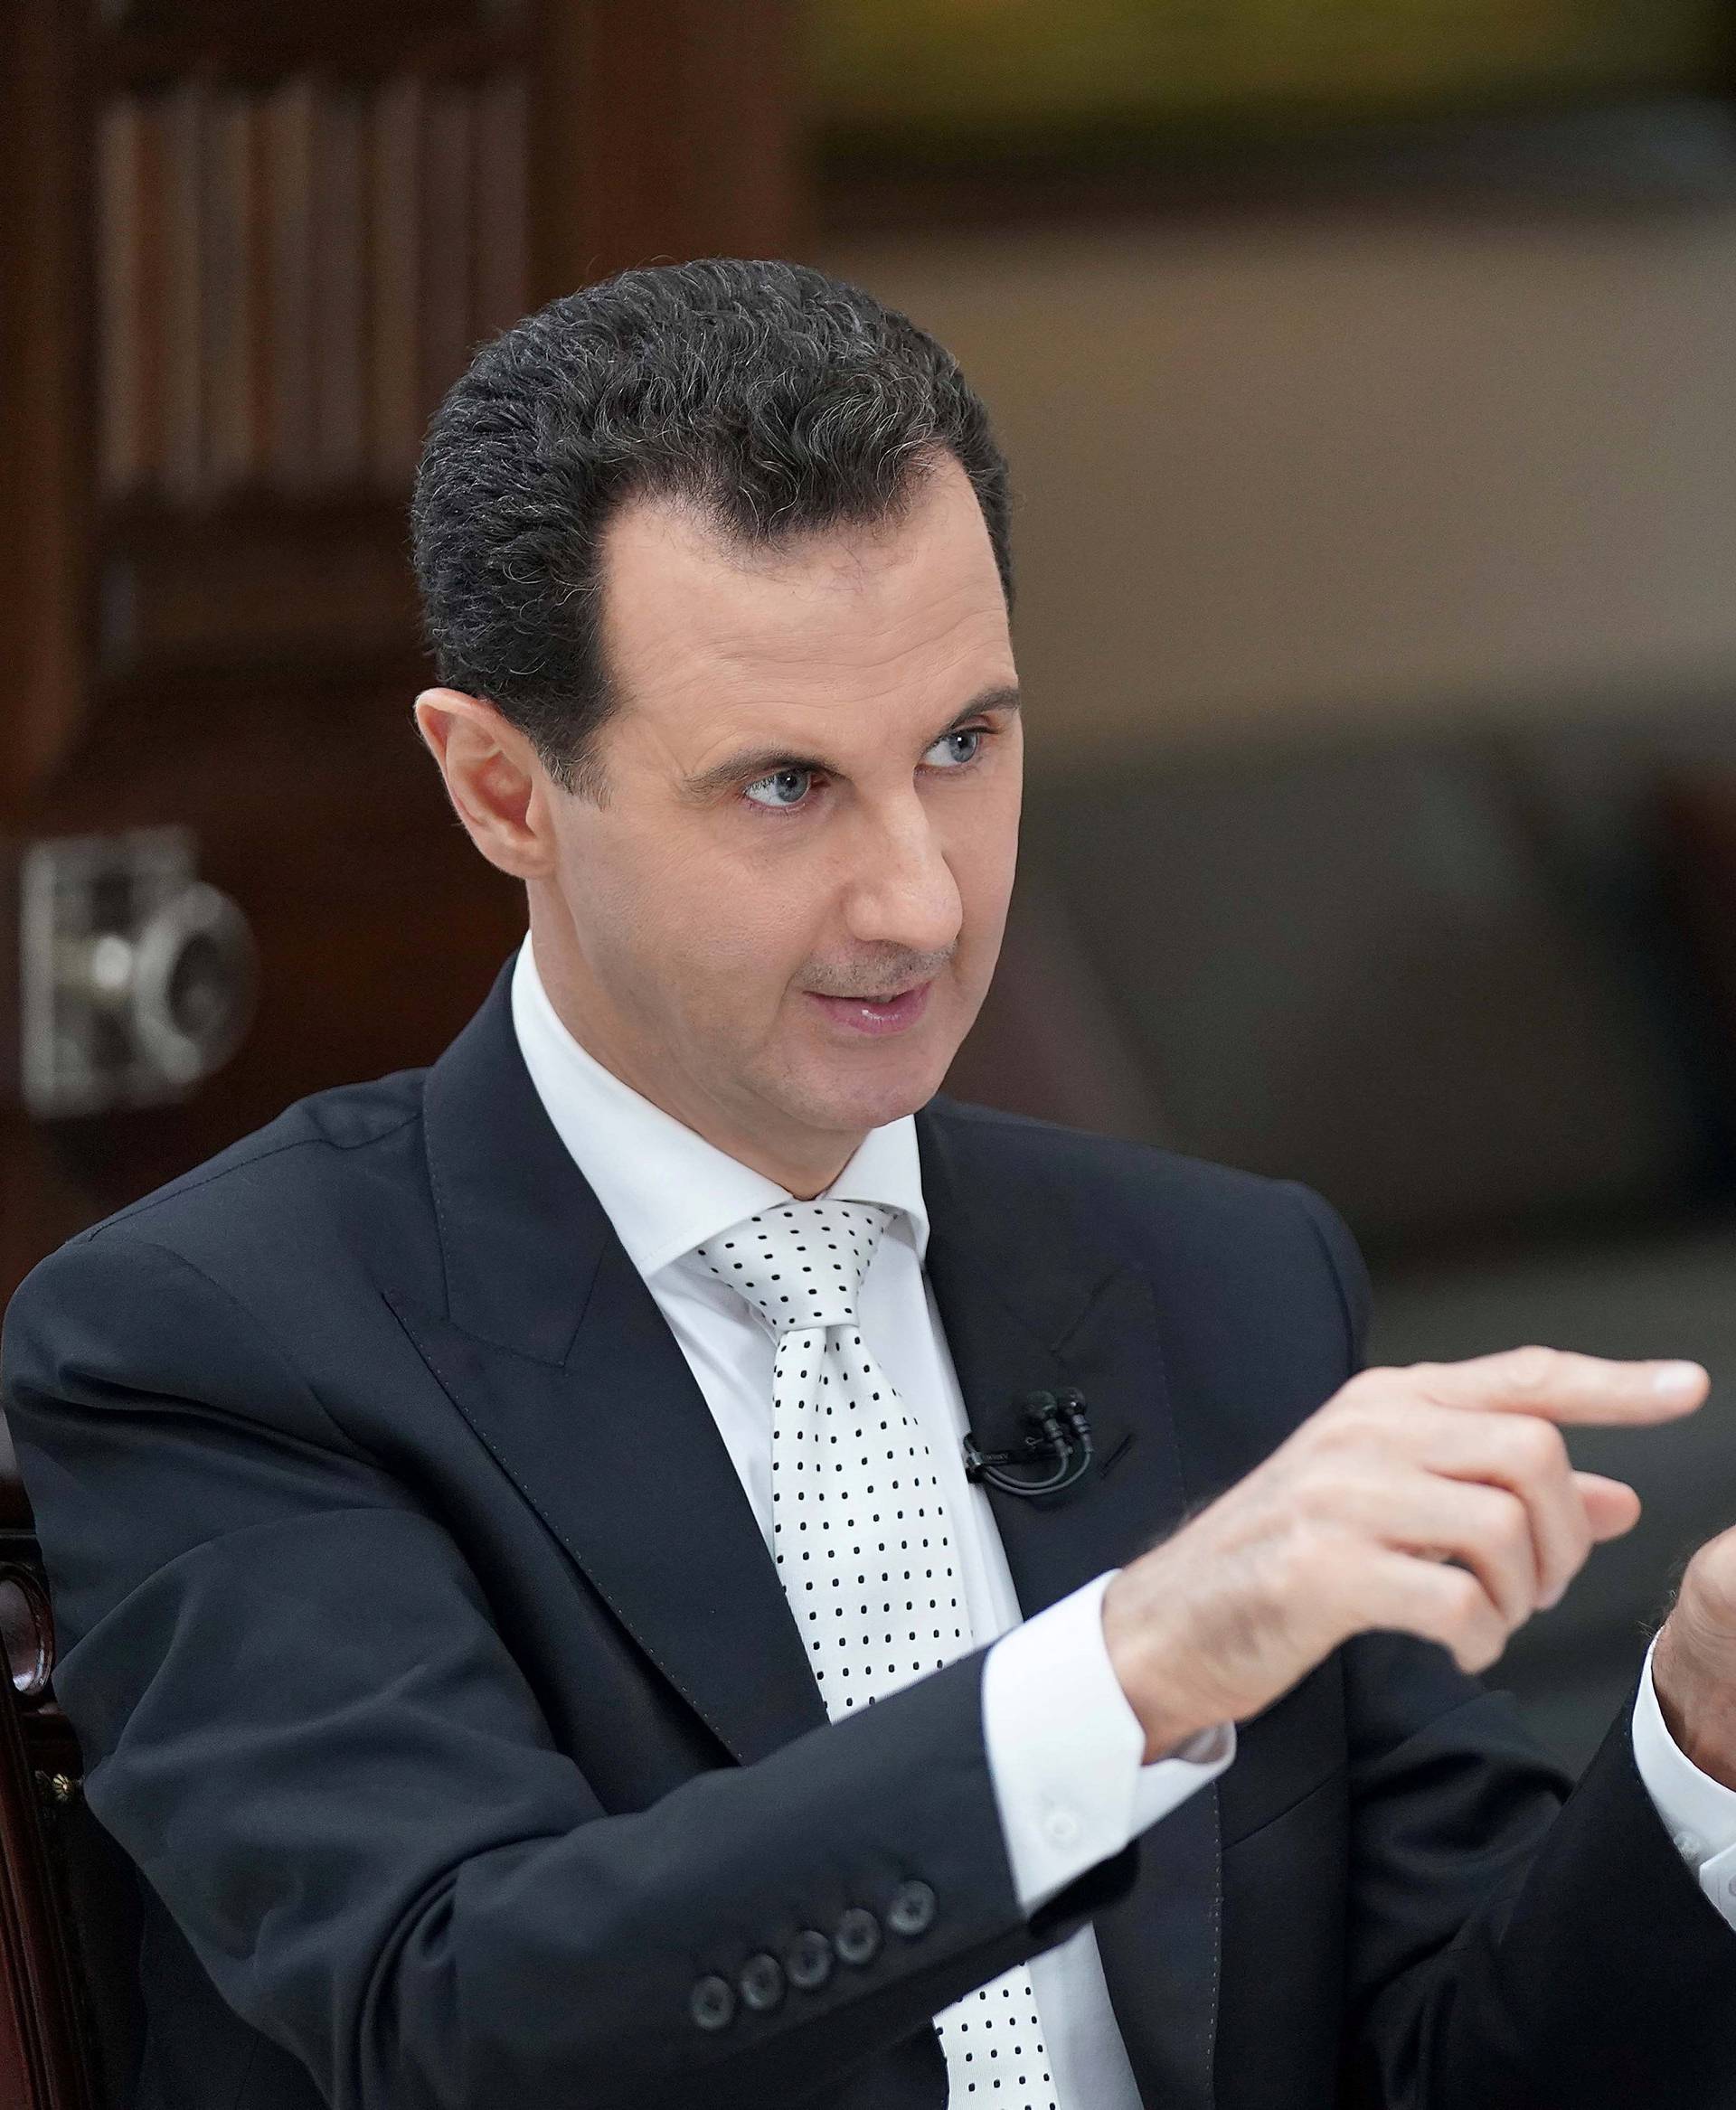 Syria's President Bashar al Assad gestures during an interview with a Greek newspaper in Damascus